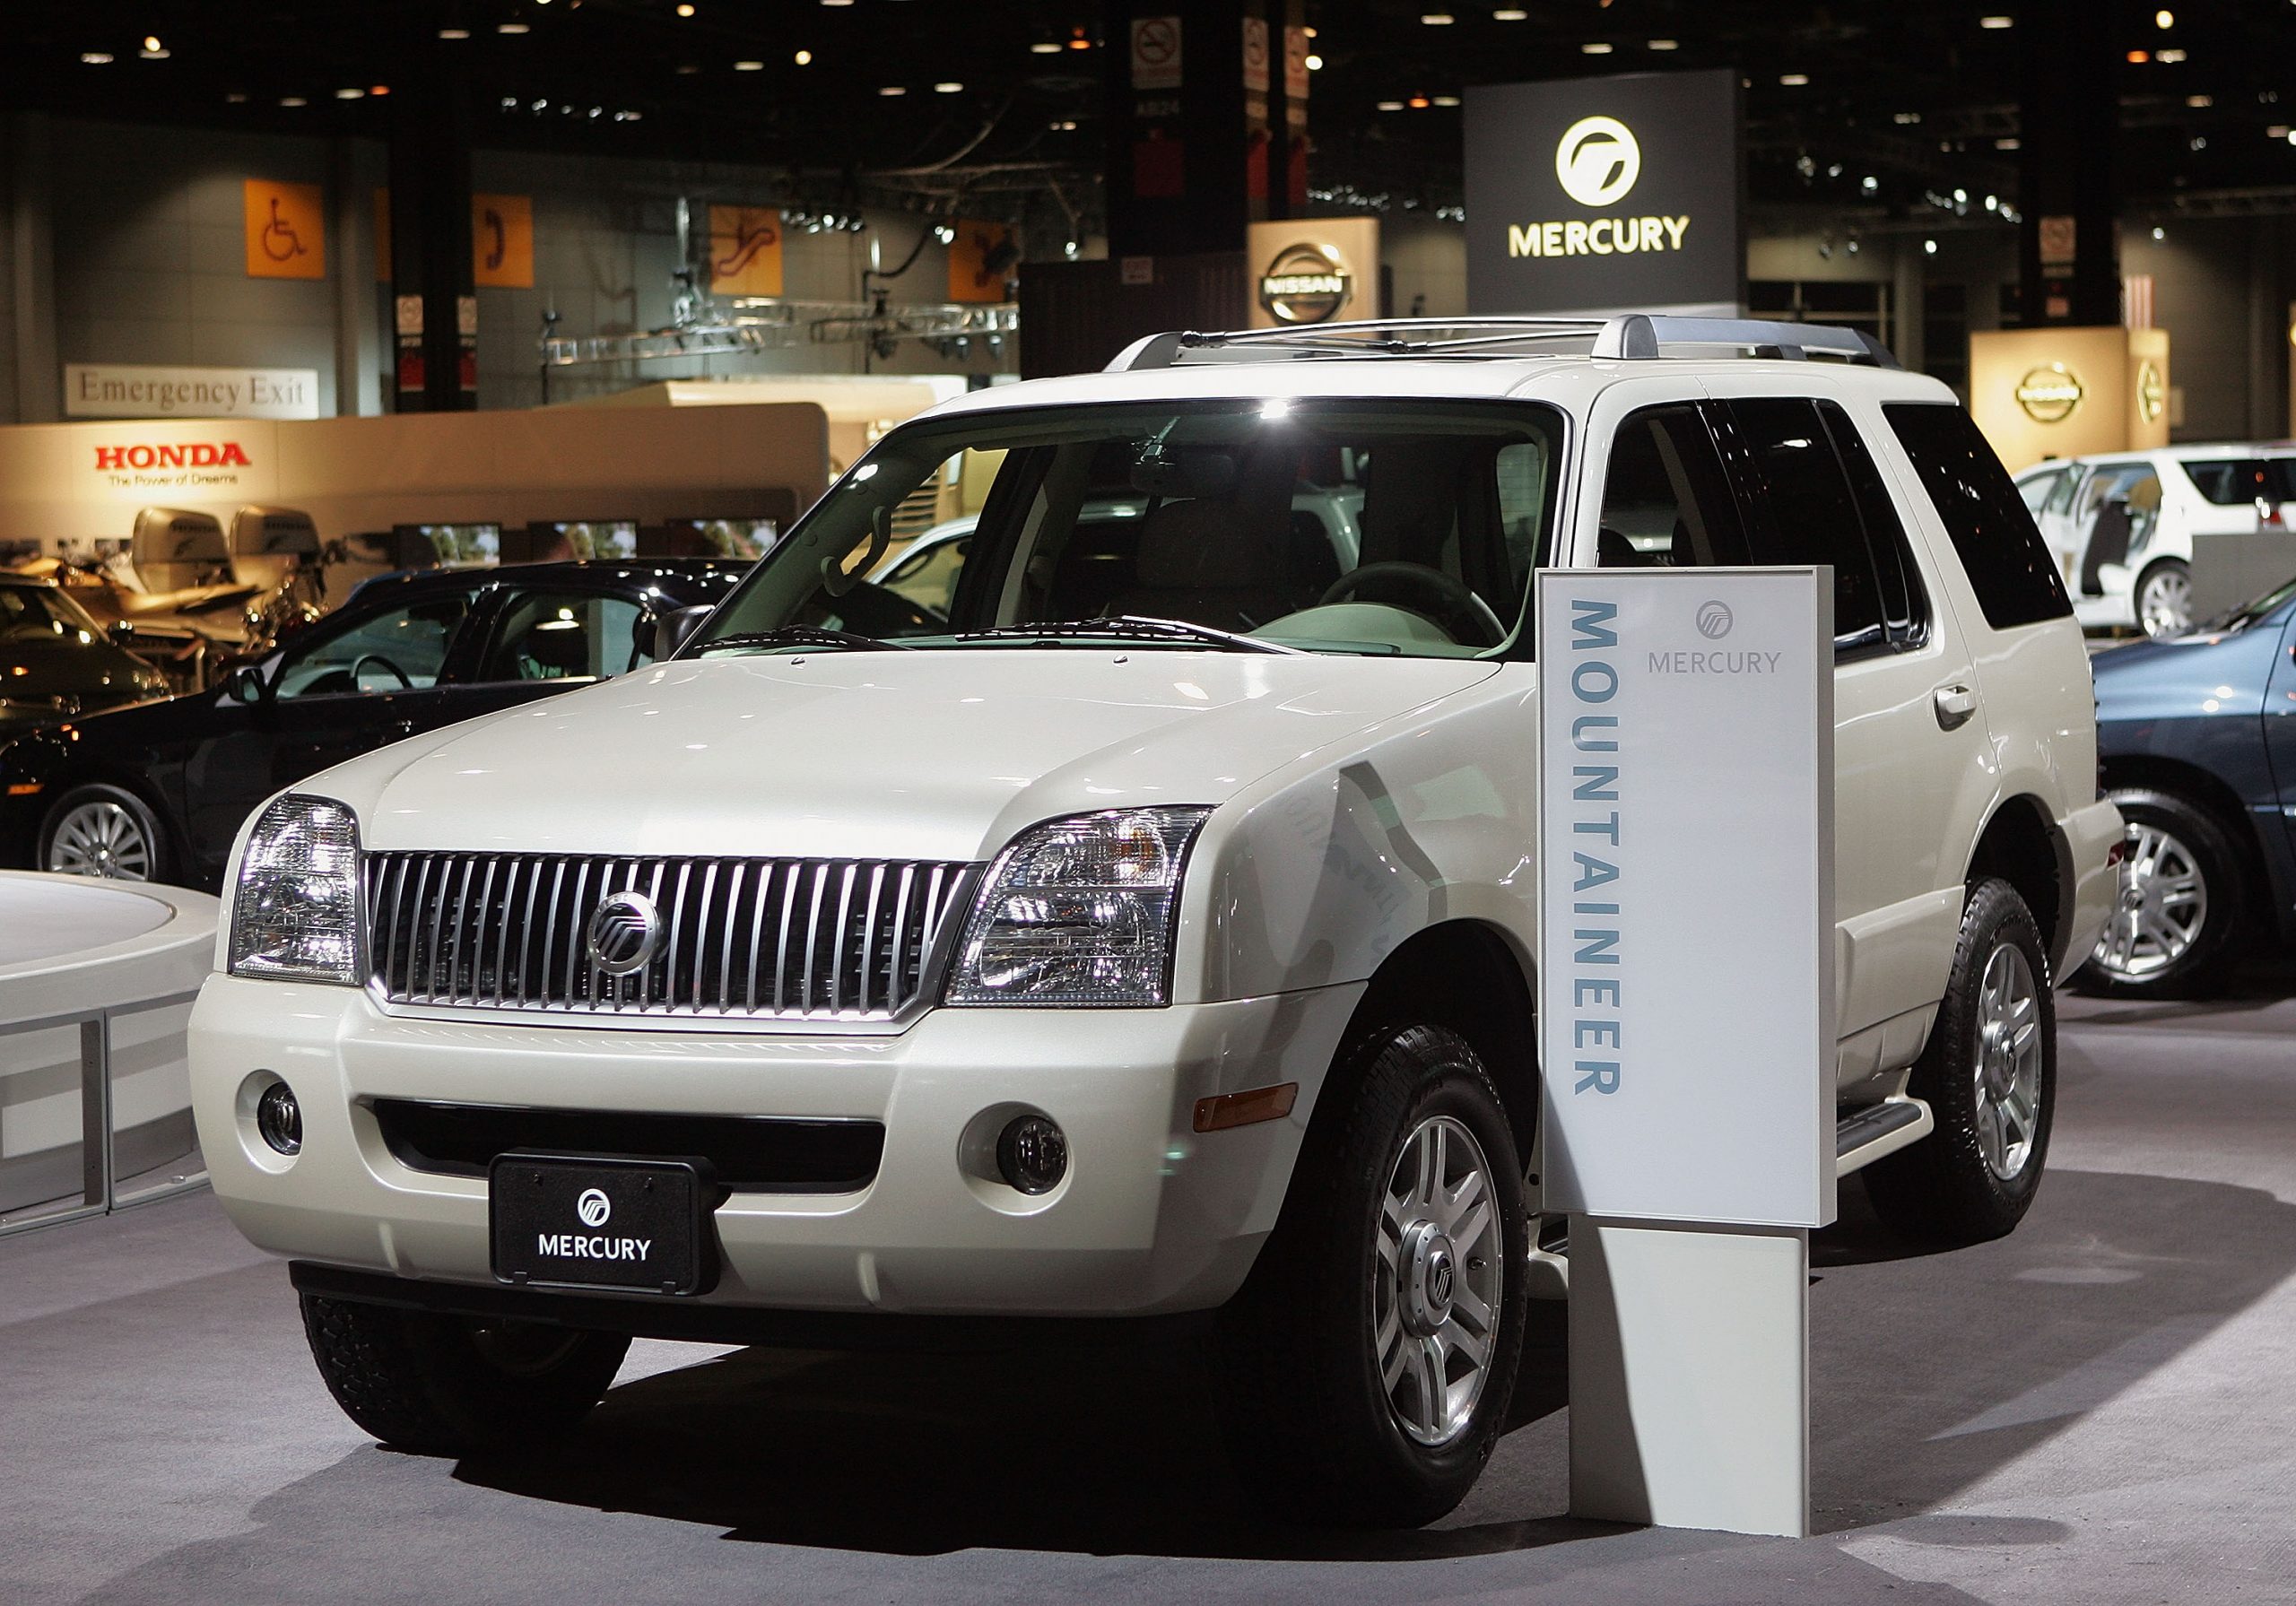 A Mercury Mountaineer on display at an auto show